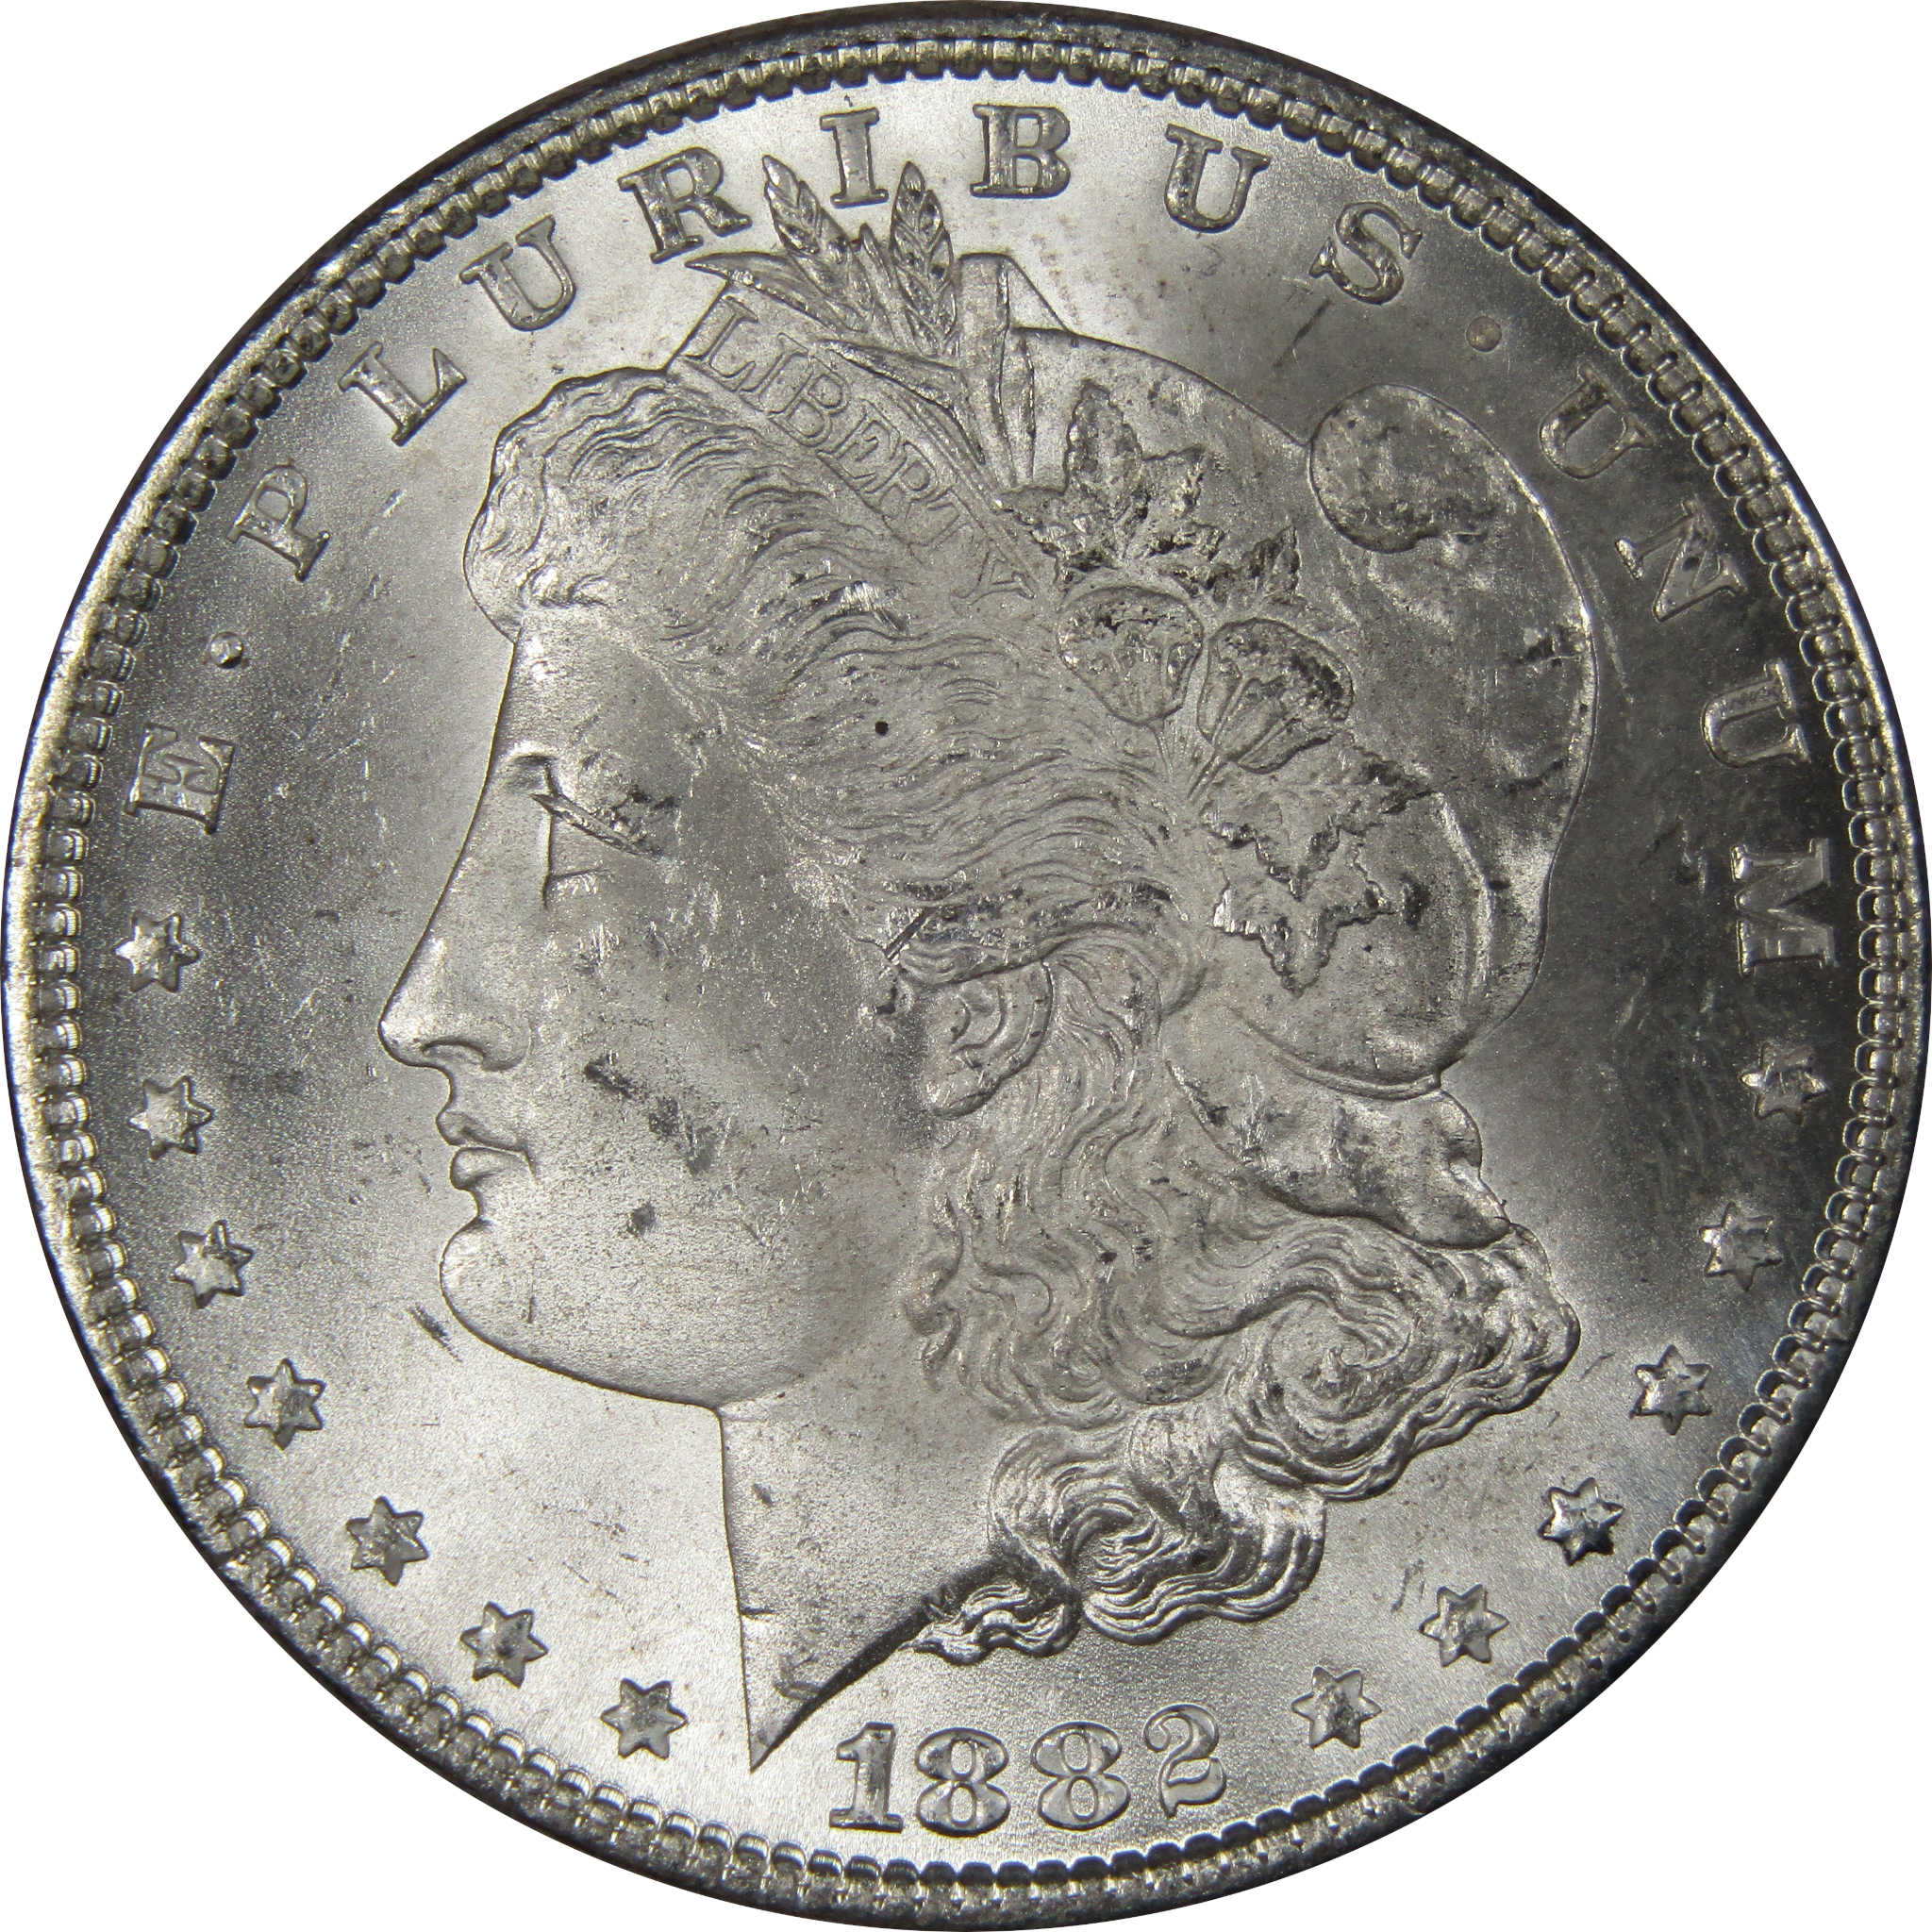 1882 Morgan Dollar BU Uncirculated Mint State 90% Silver SKU:IPC9713 - Morgan coin - Morgan silver dollar - Morgan silver dollar for sale - Profile Coins &amp; Collectibles